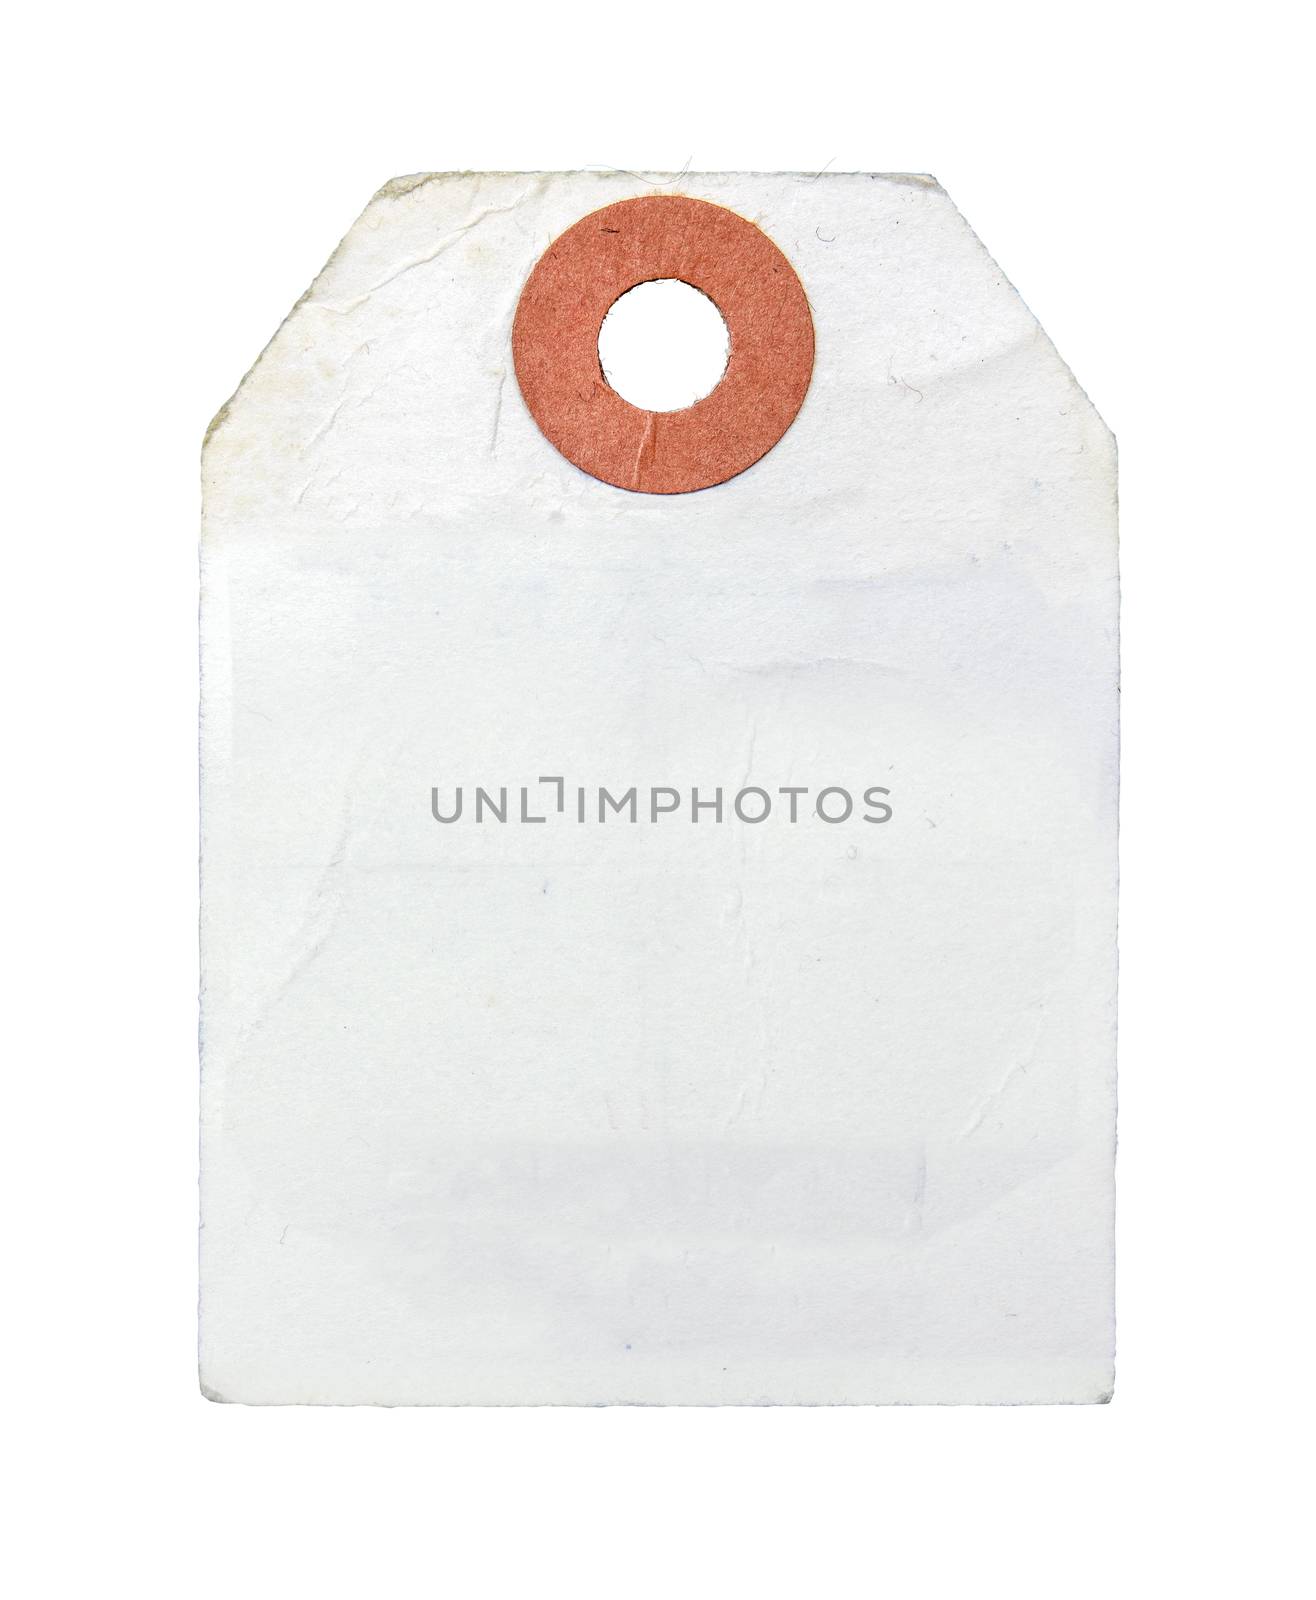 Vintage Retro White Paper Label Or Luggage Tag On A White Background